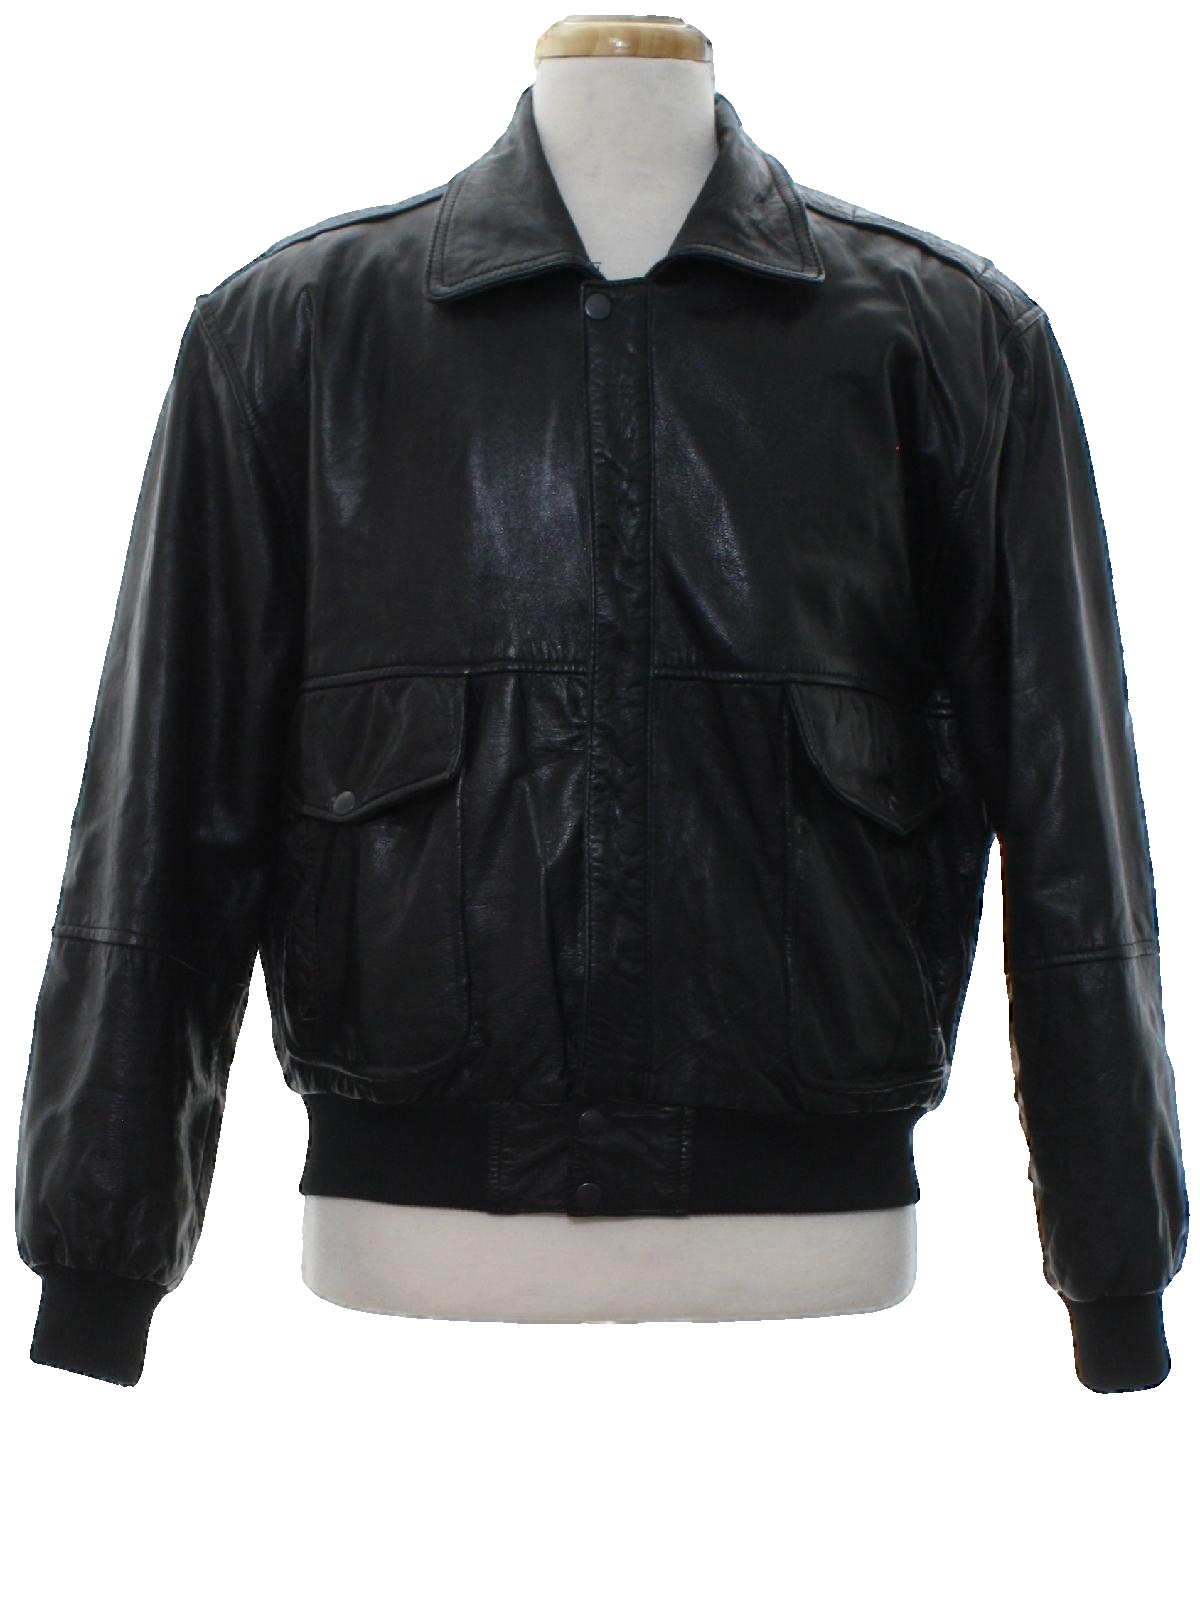 Vintage B 80's Leather Jacket: Late 80s -B-2- Mens black leather ribbed ...